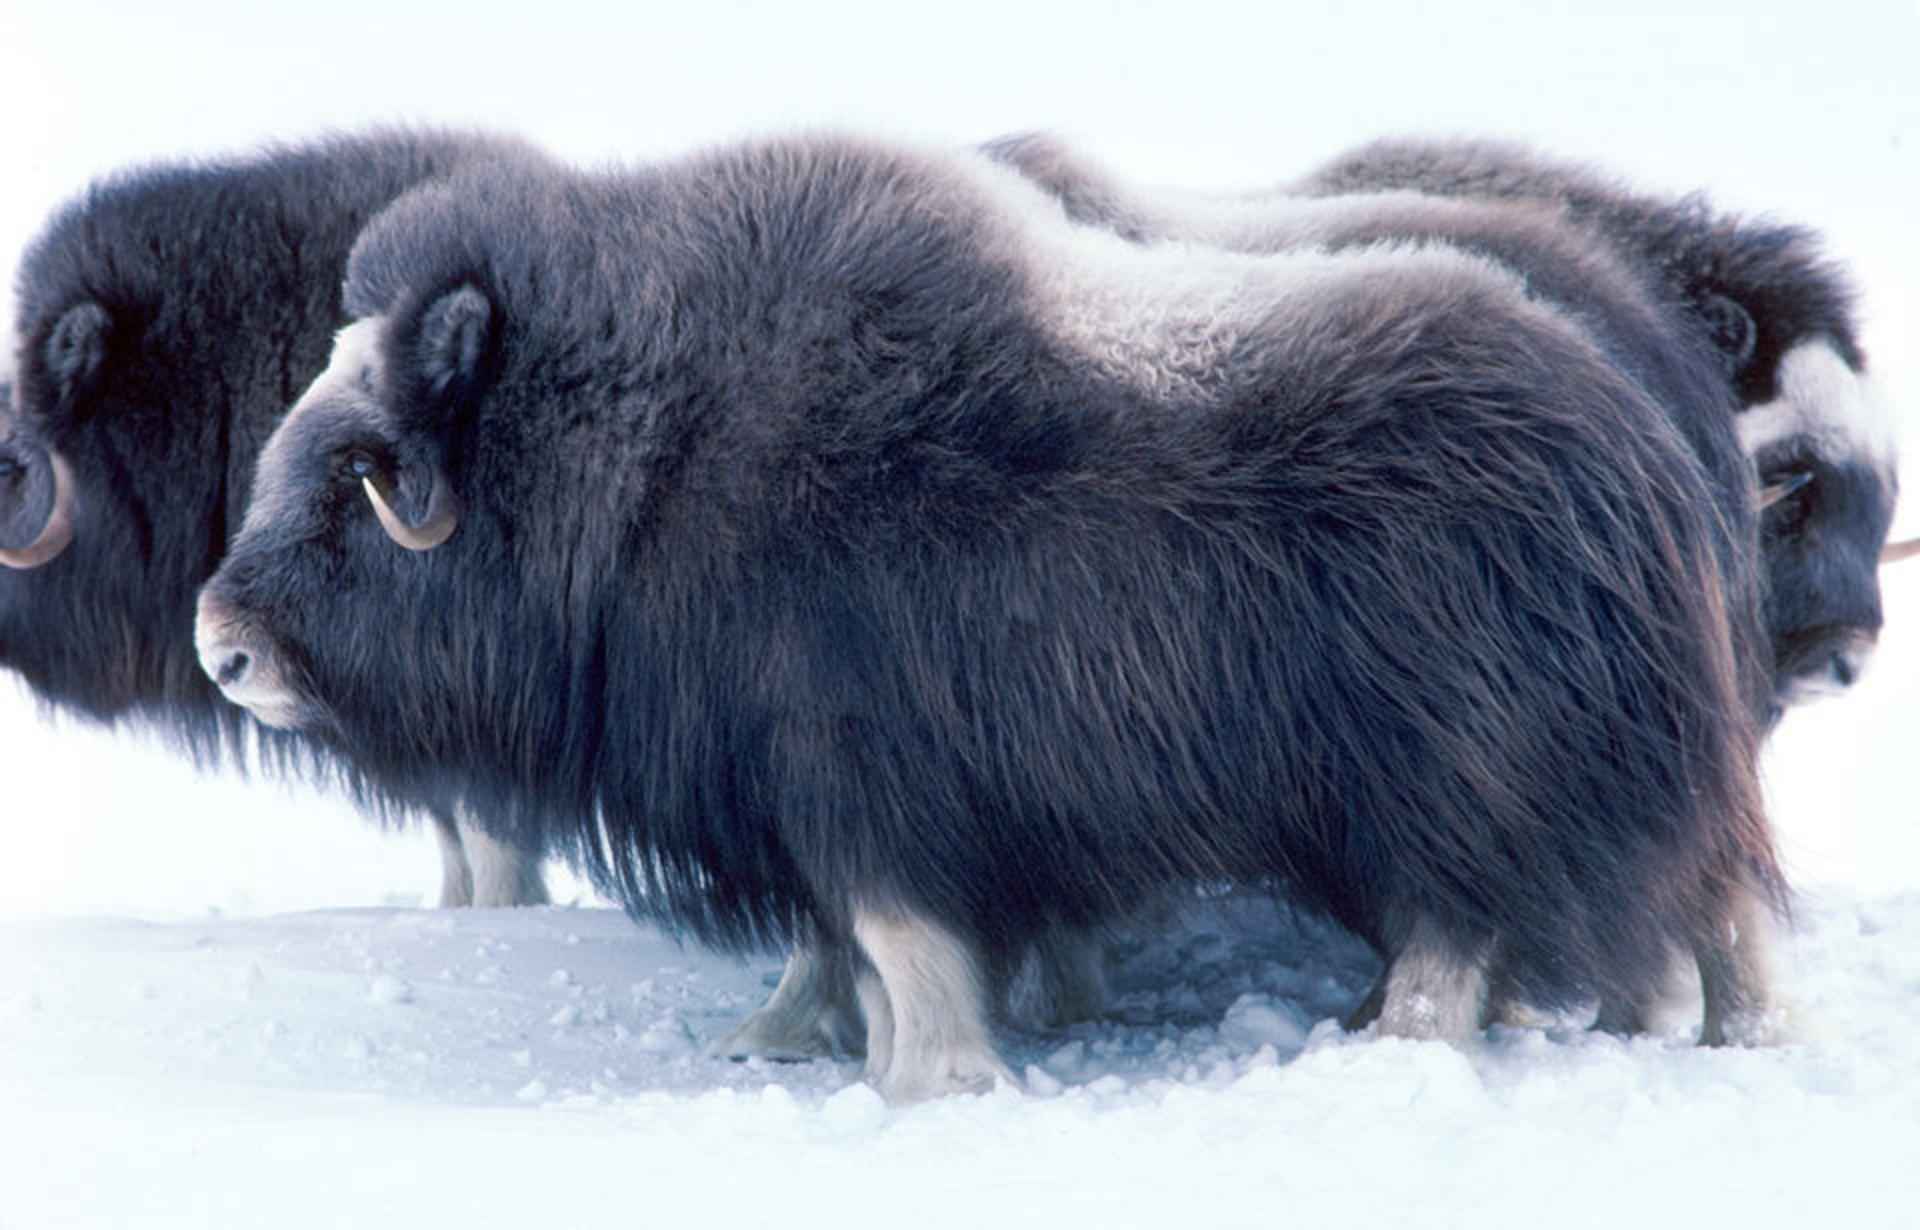 Musk Ox showing the unique skirt